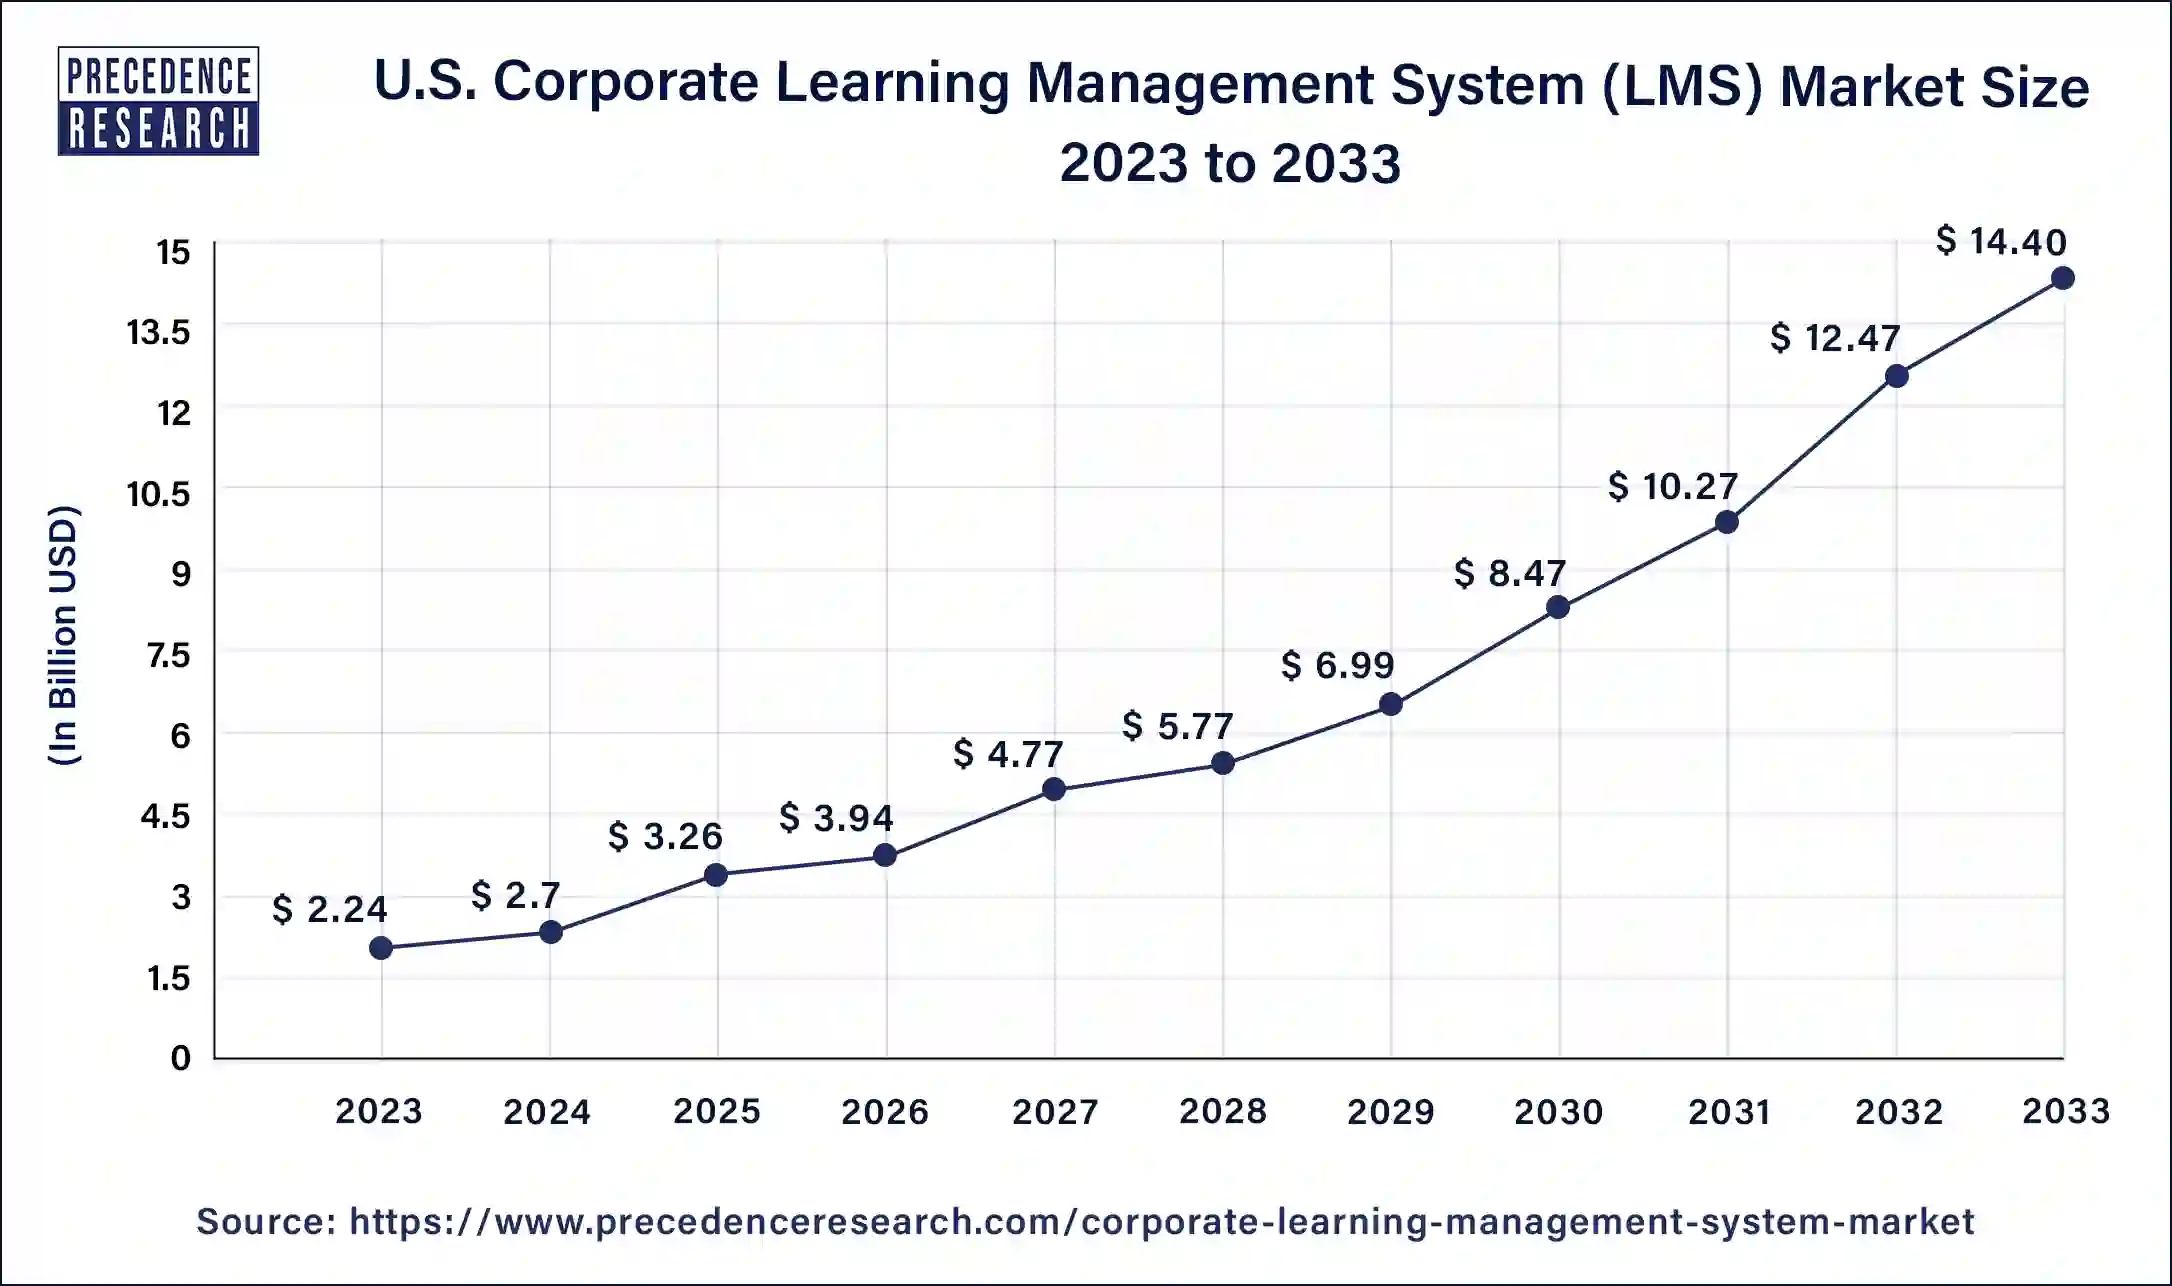 U.S. Corporate Learning Management System (LMS) Market Size 2024 to 2033